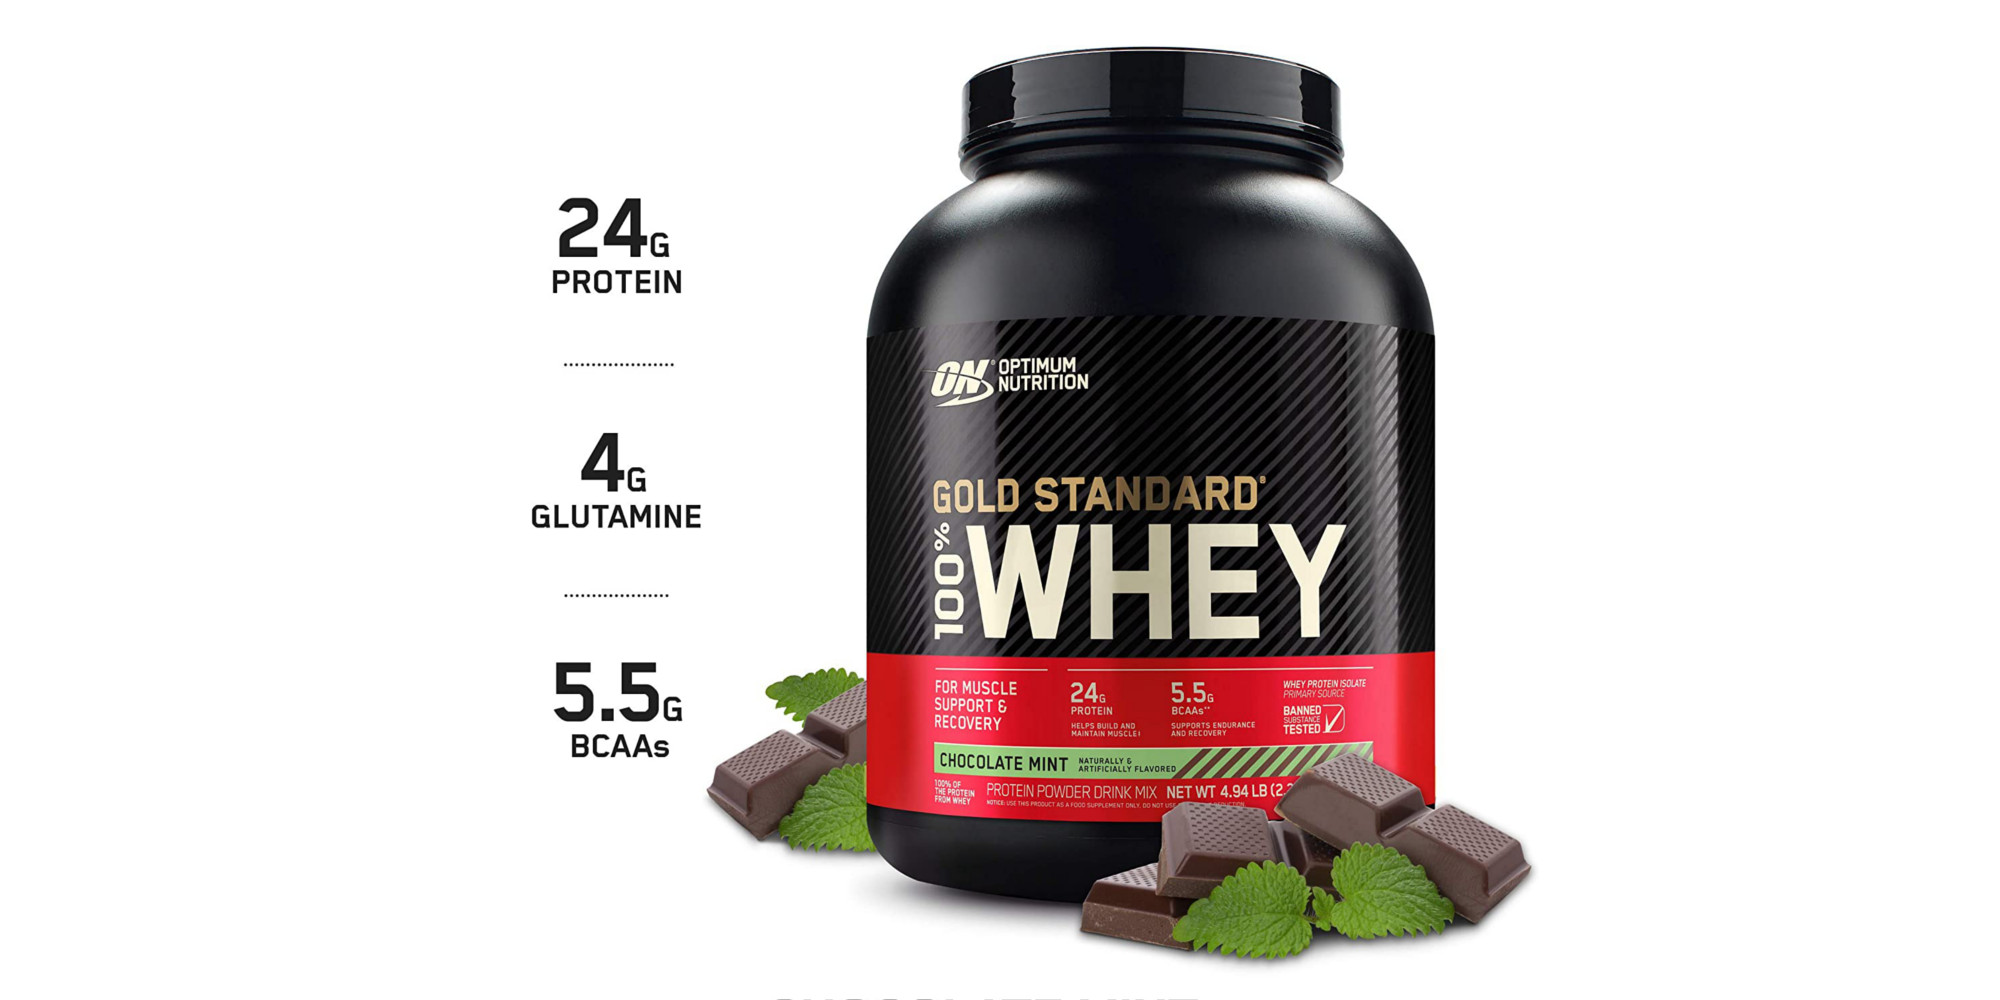 Score 5-lbs. of OPTIMUM NUTRITION Whey Protein for $35 at Amazon (Reg